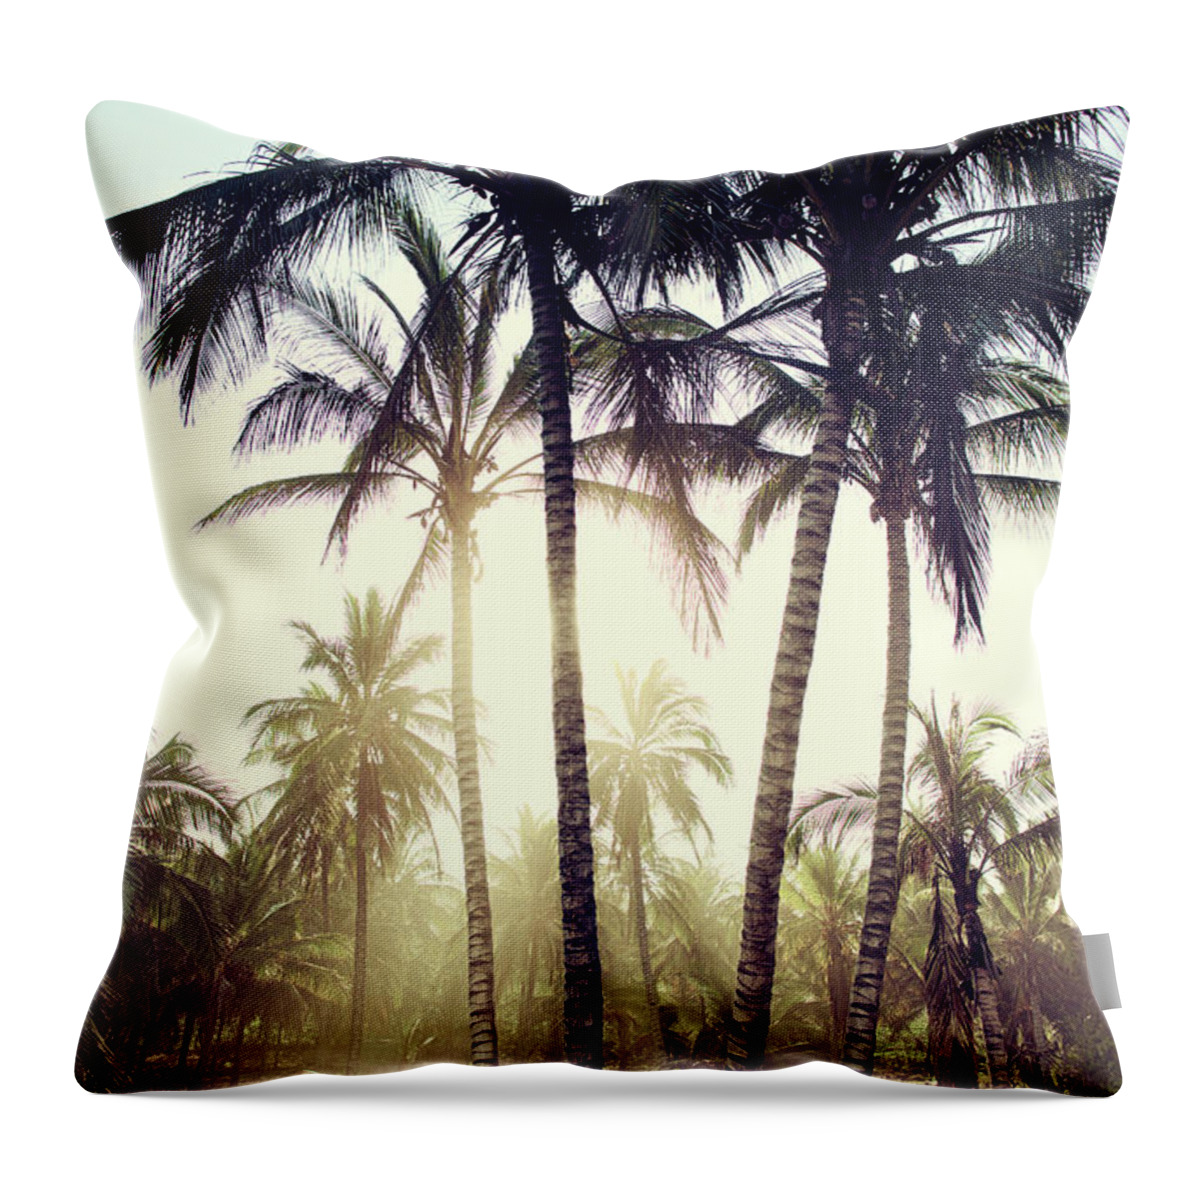 Surfing Throw Pillow featuring the photograph Ticla Palms #1 by Nik West